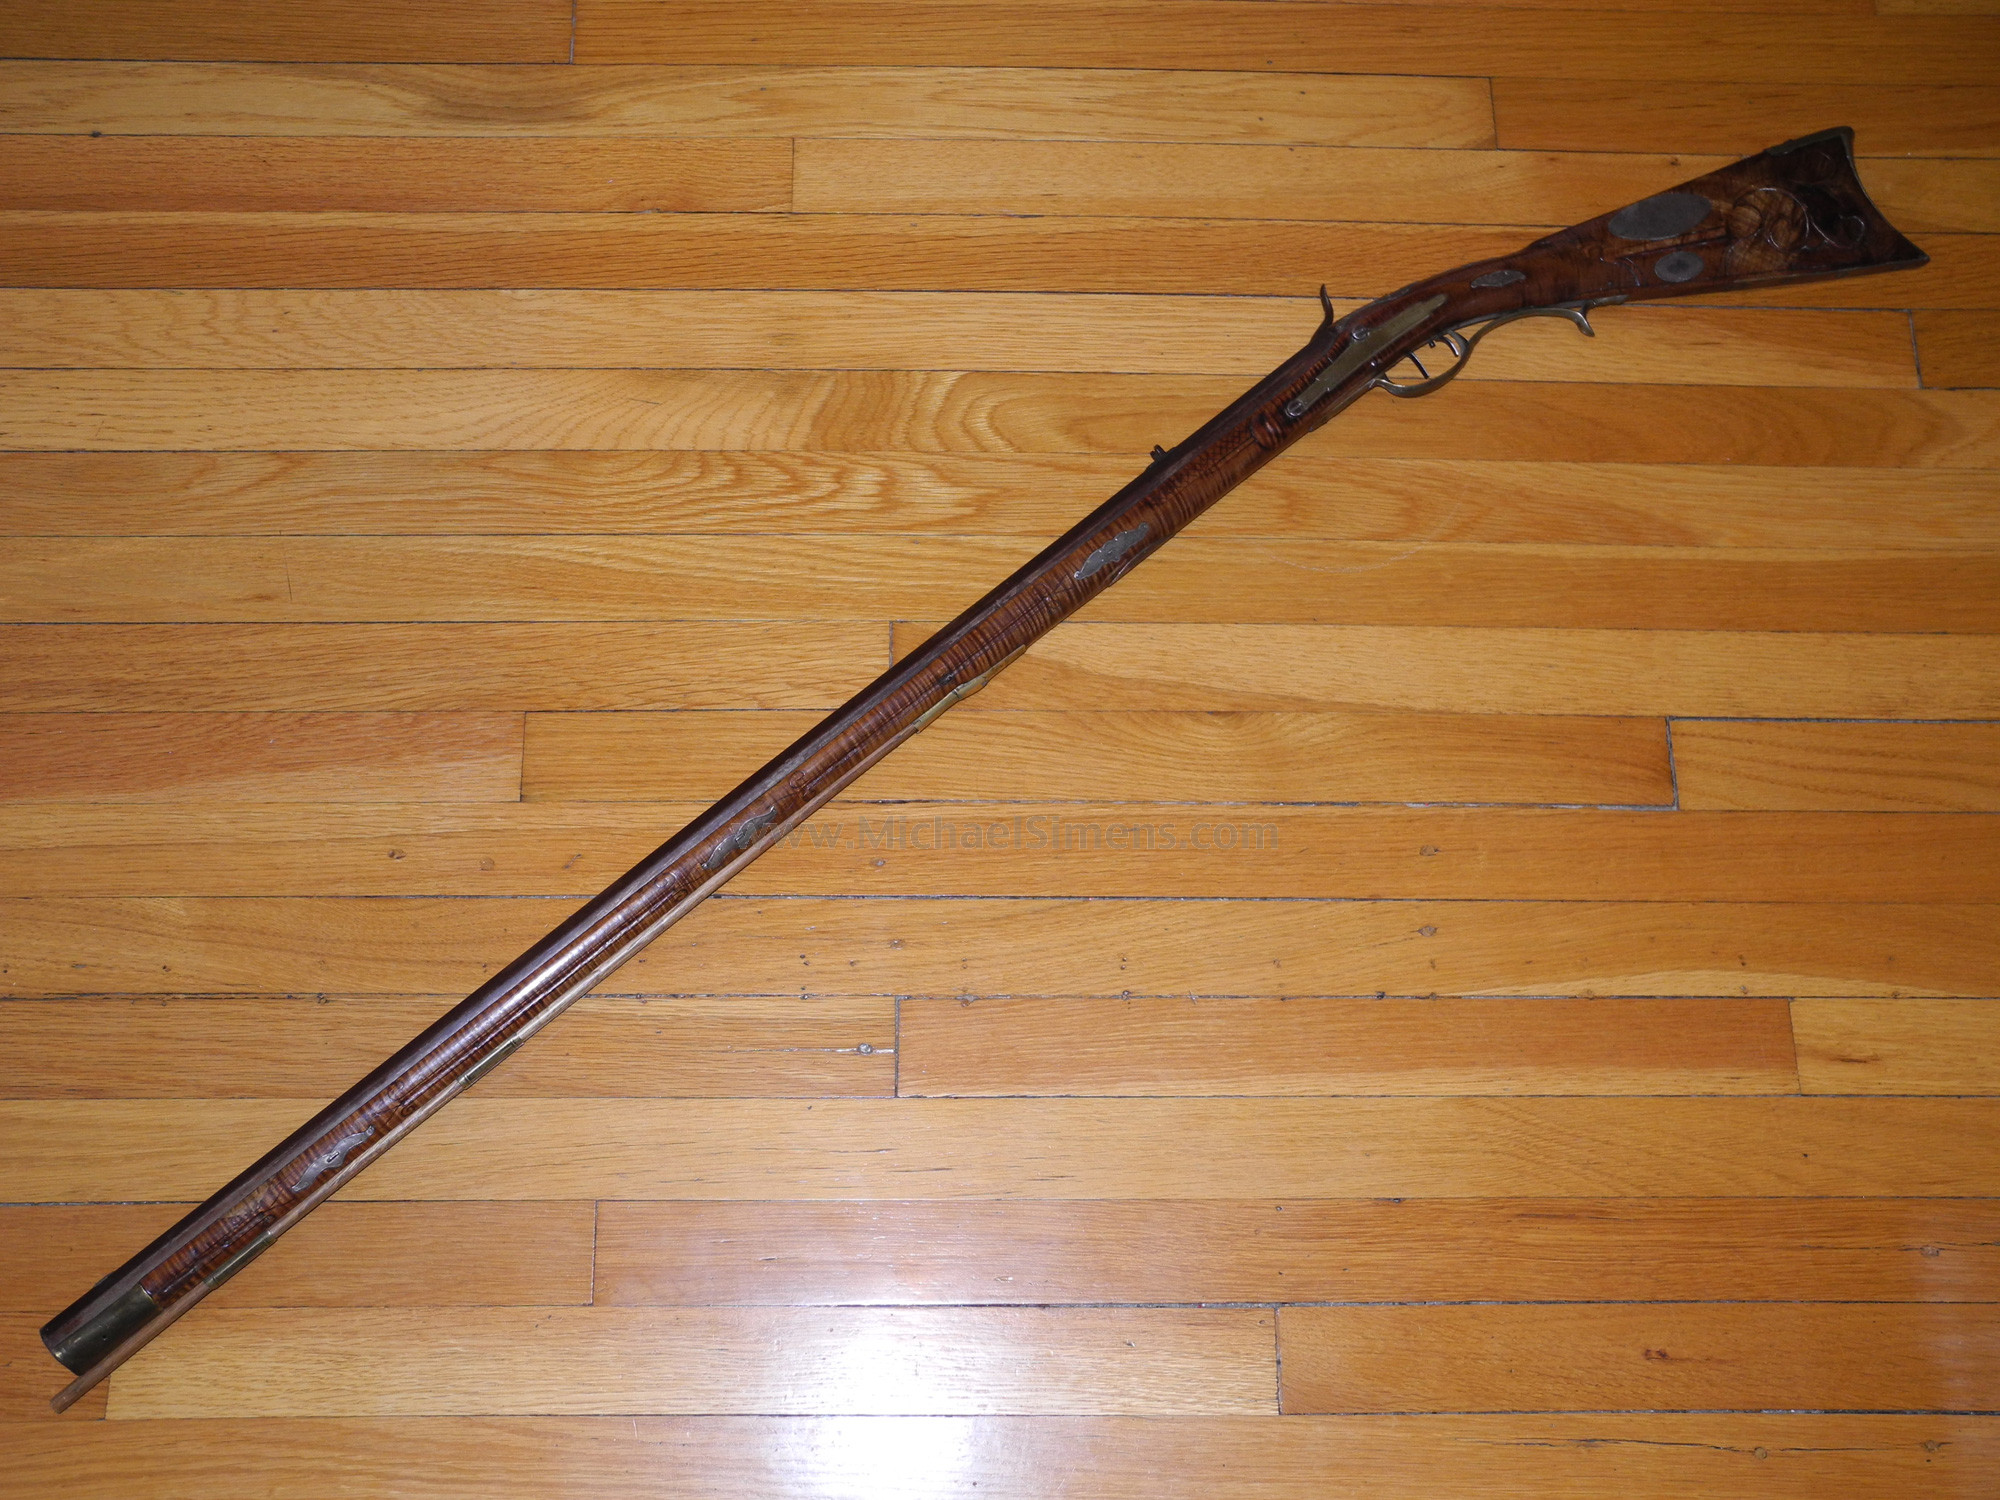 KENTUCKY RIFLE FOR SALE, PETER WHITE BEDFORD RIFLE